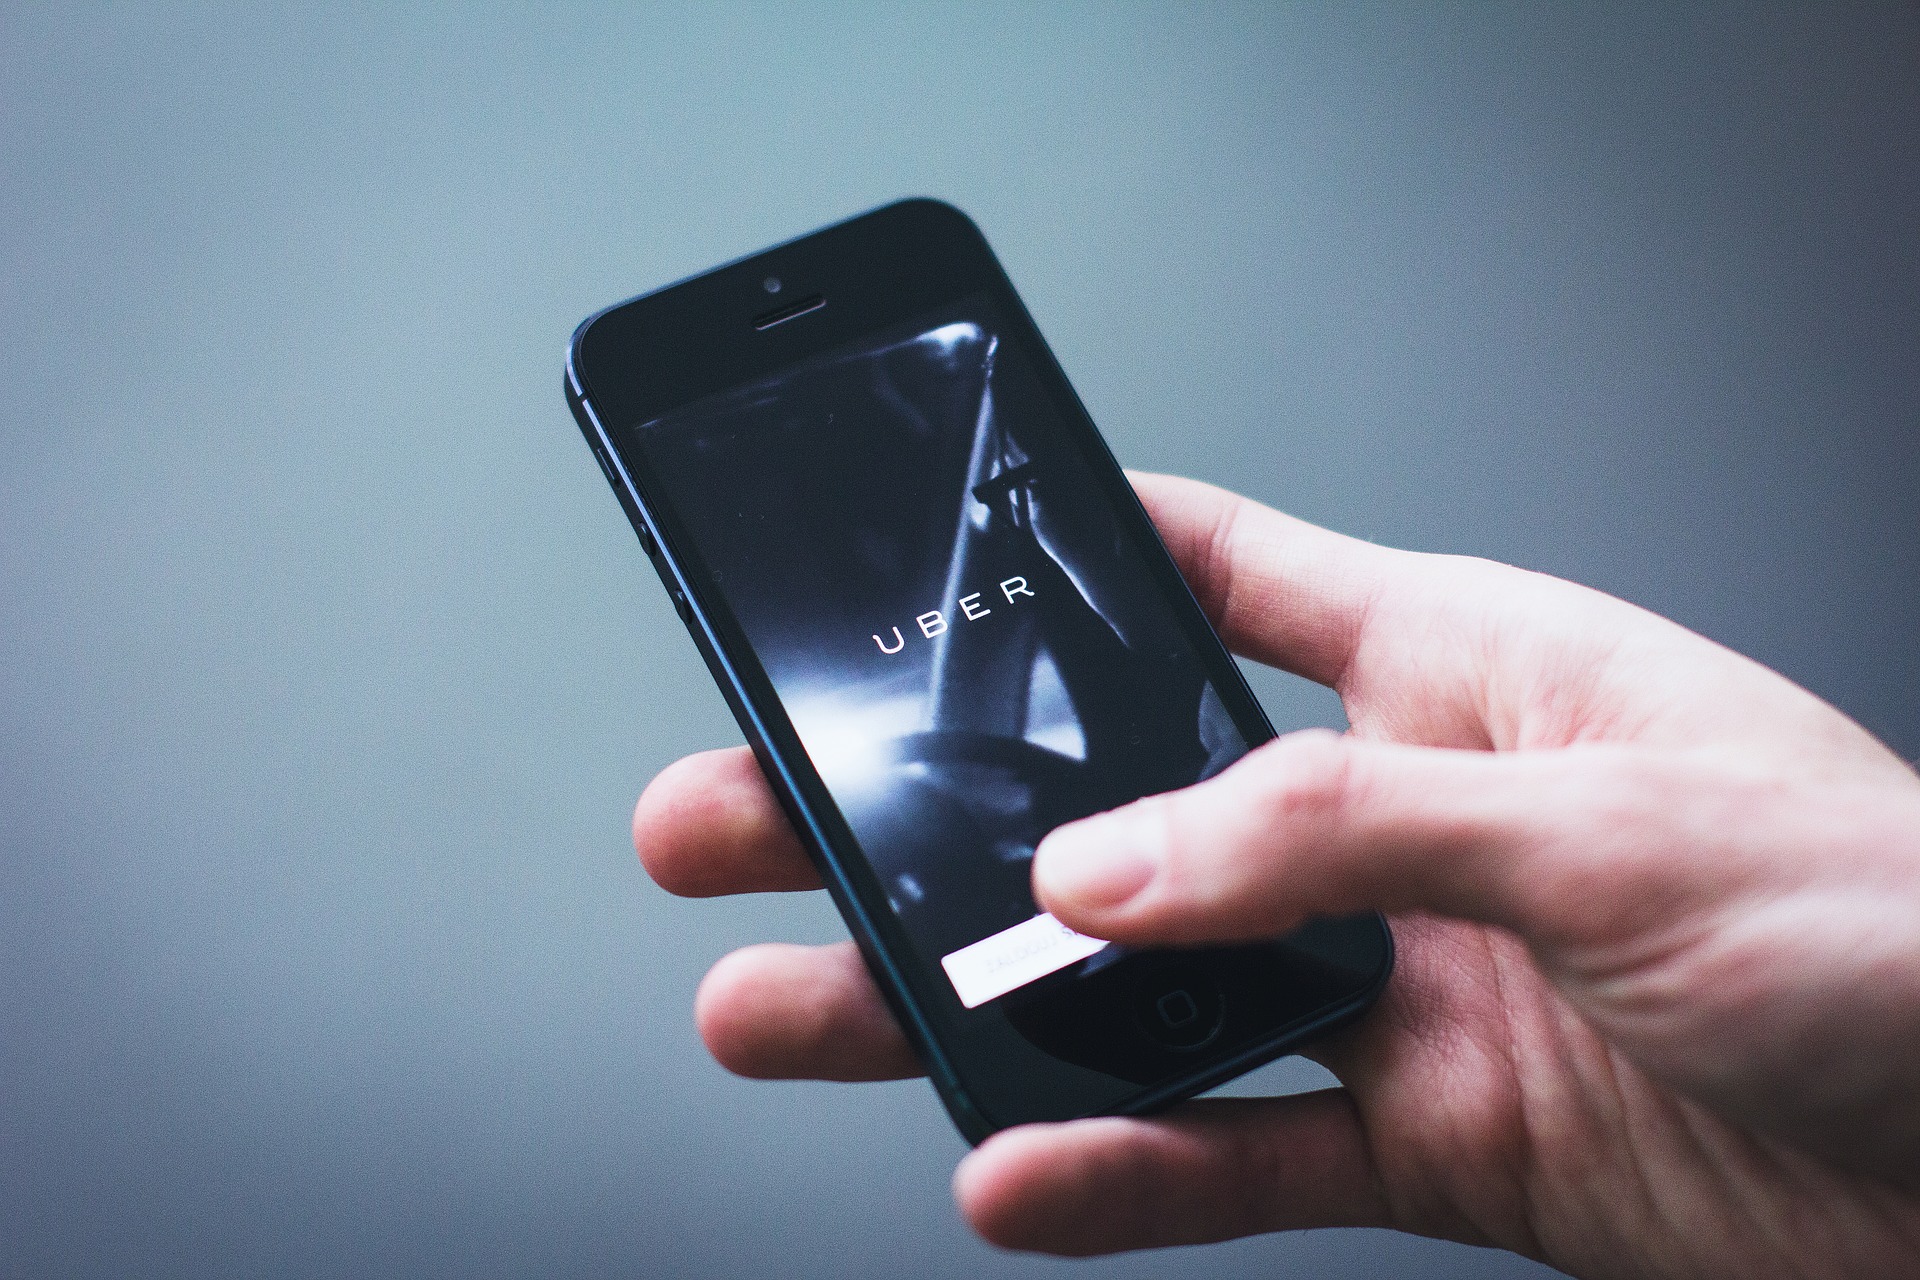 Closeup of a caucasian and holding and iPhone with the Uber App open, symbolizing the need for a liability lawyer in personal injury cases.